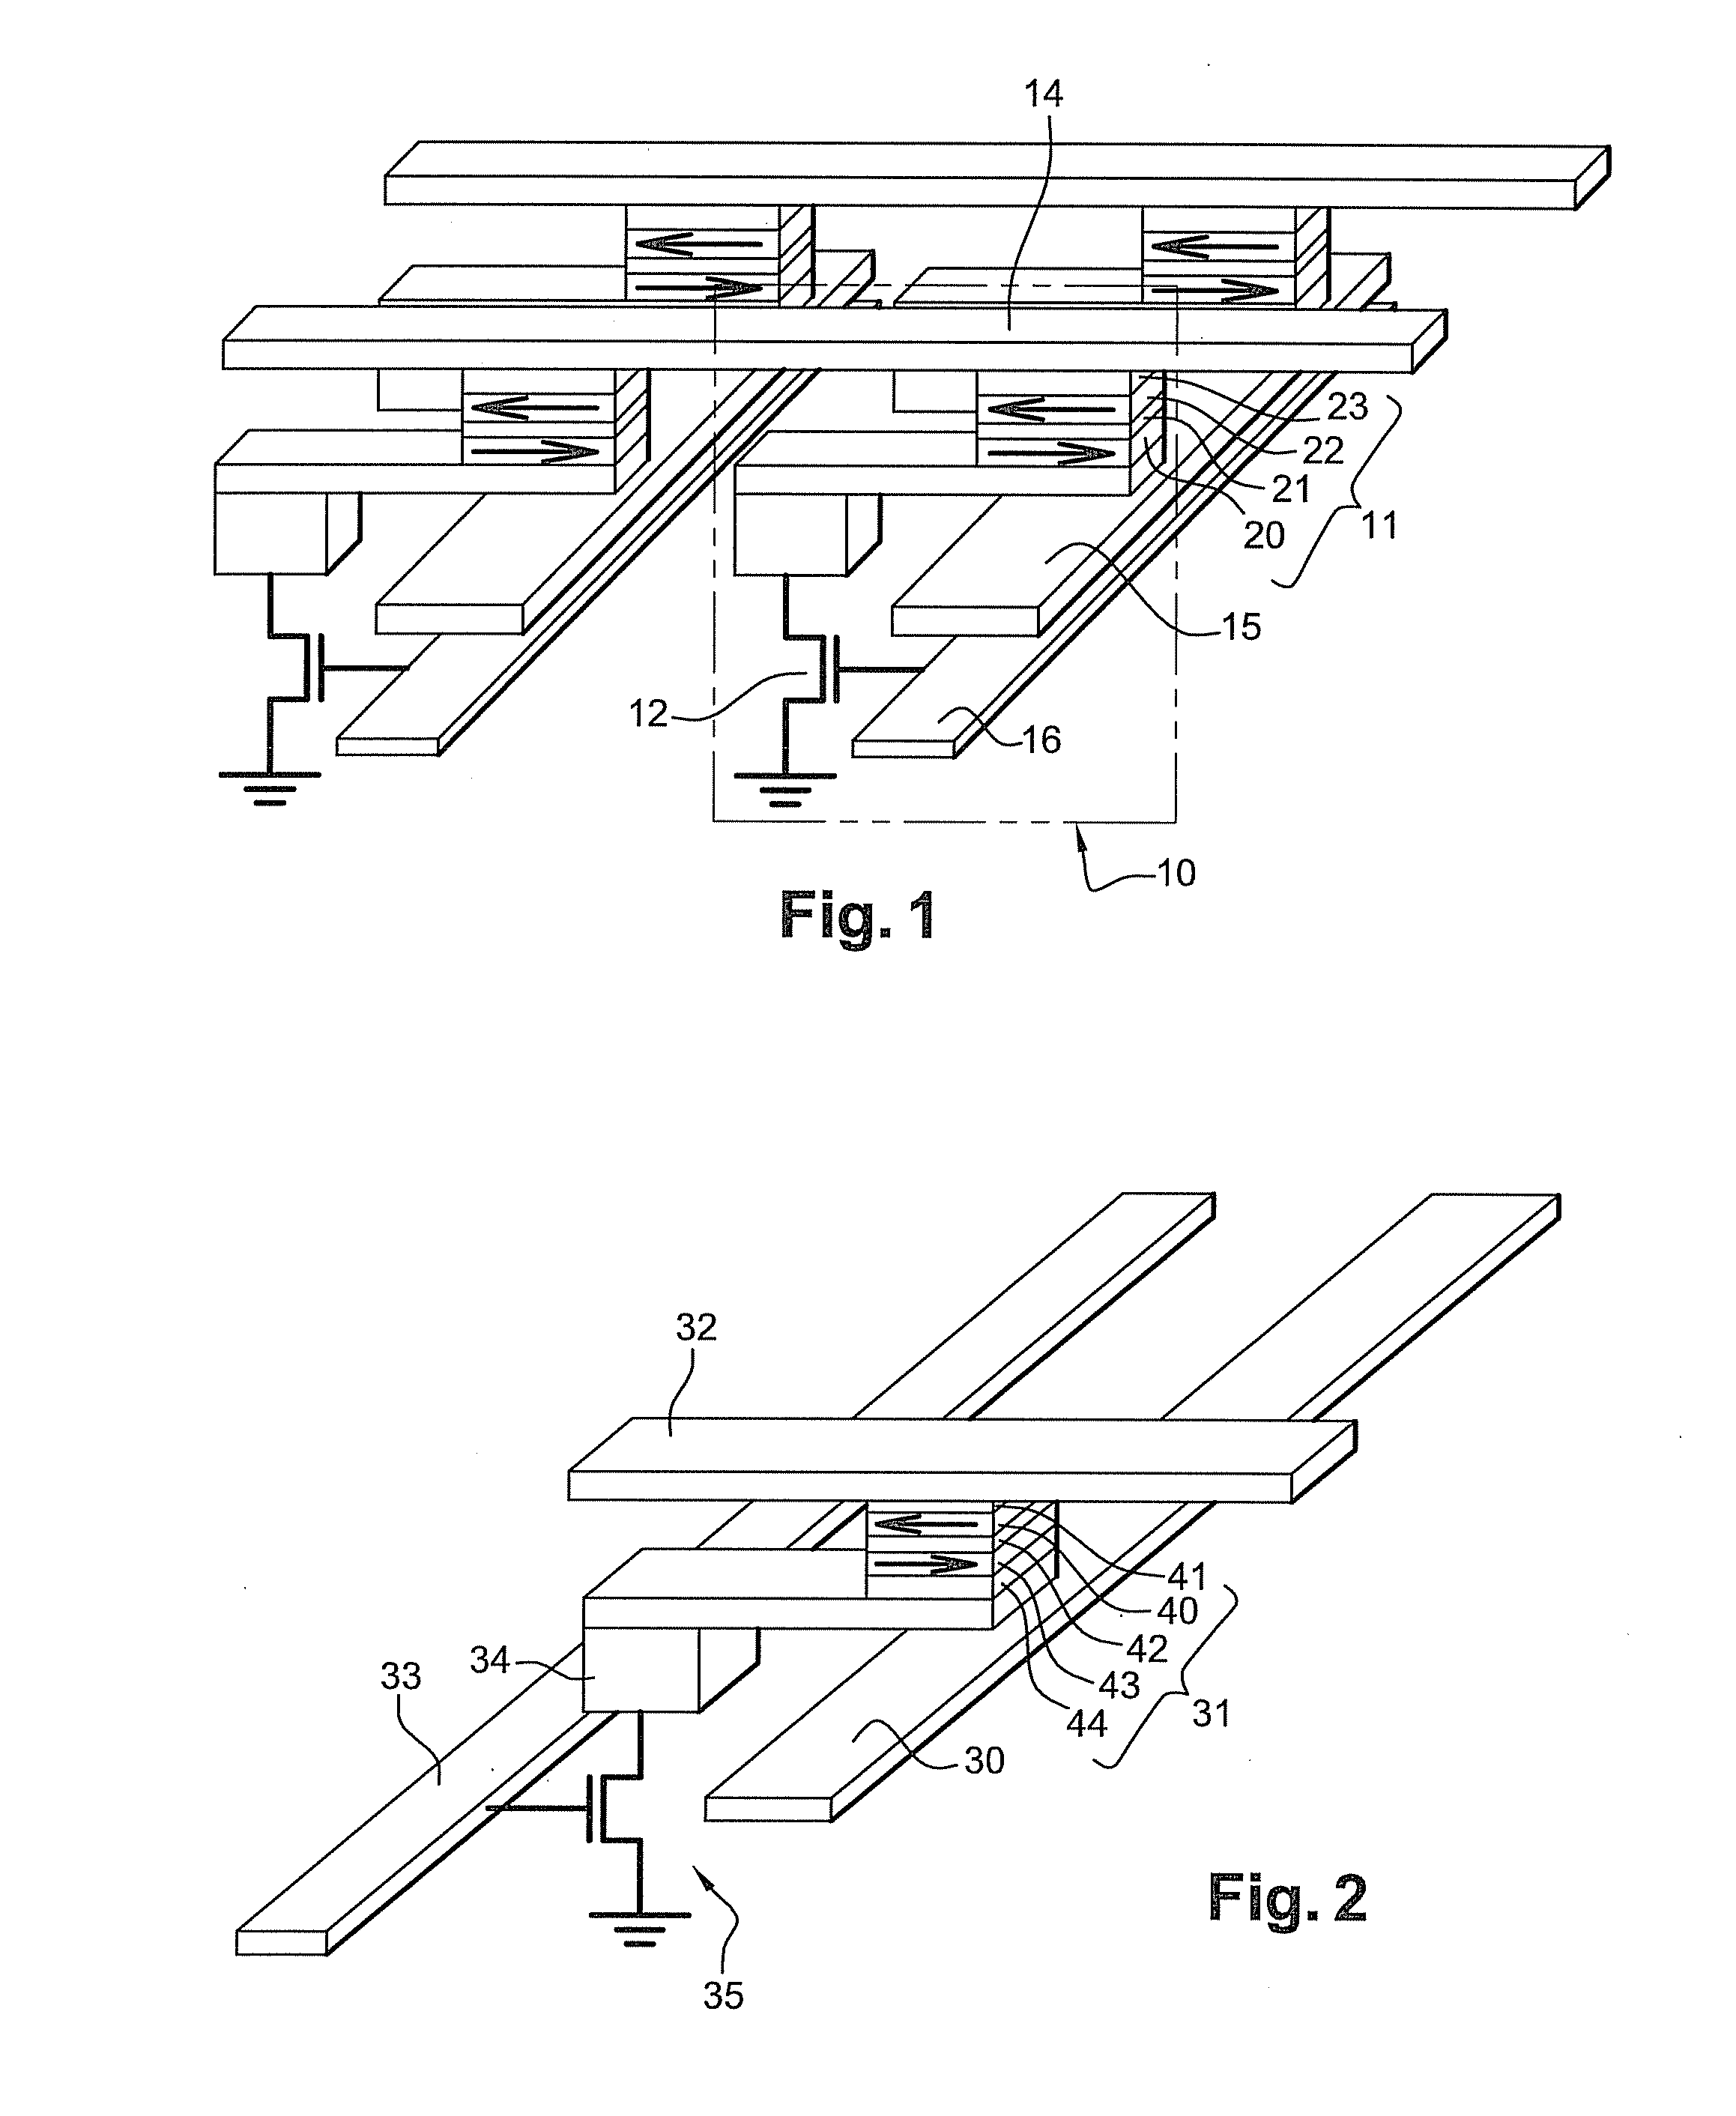 Heat assisted magnetic write element